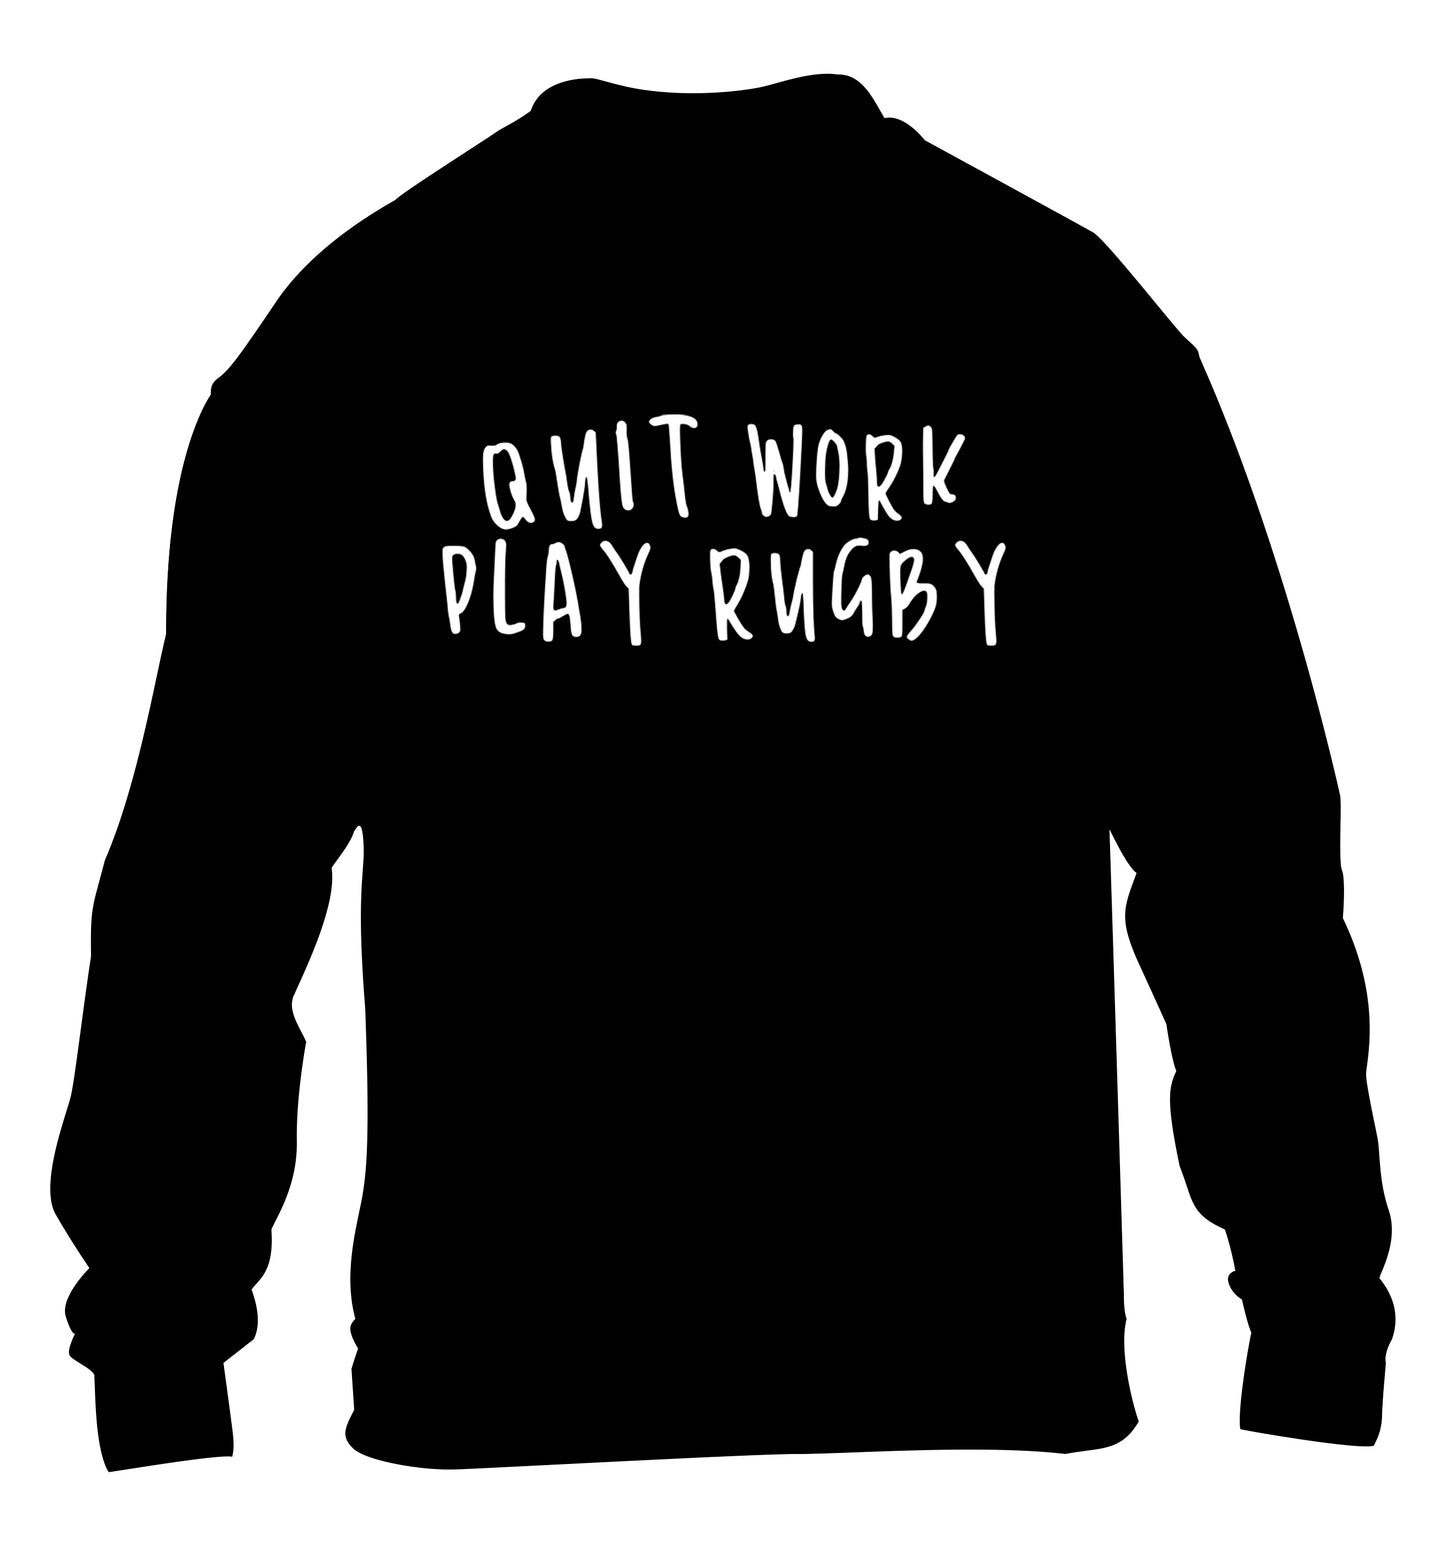 Quit work play rugby children's black sweater 12-13 Years